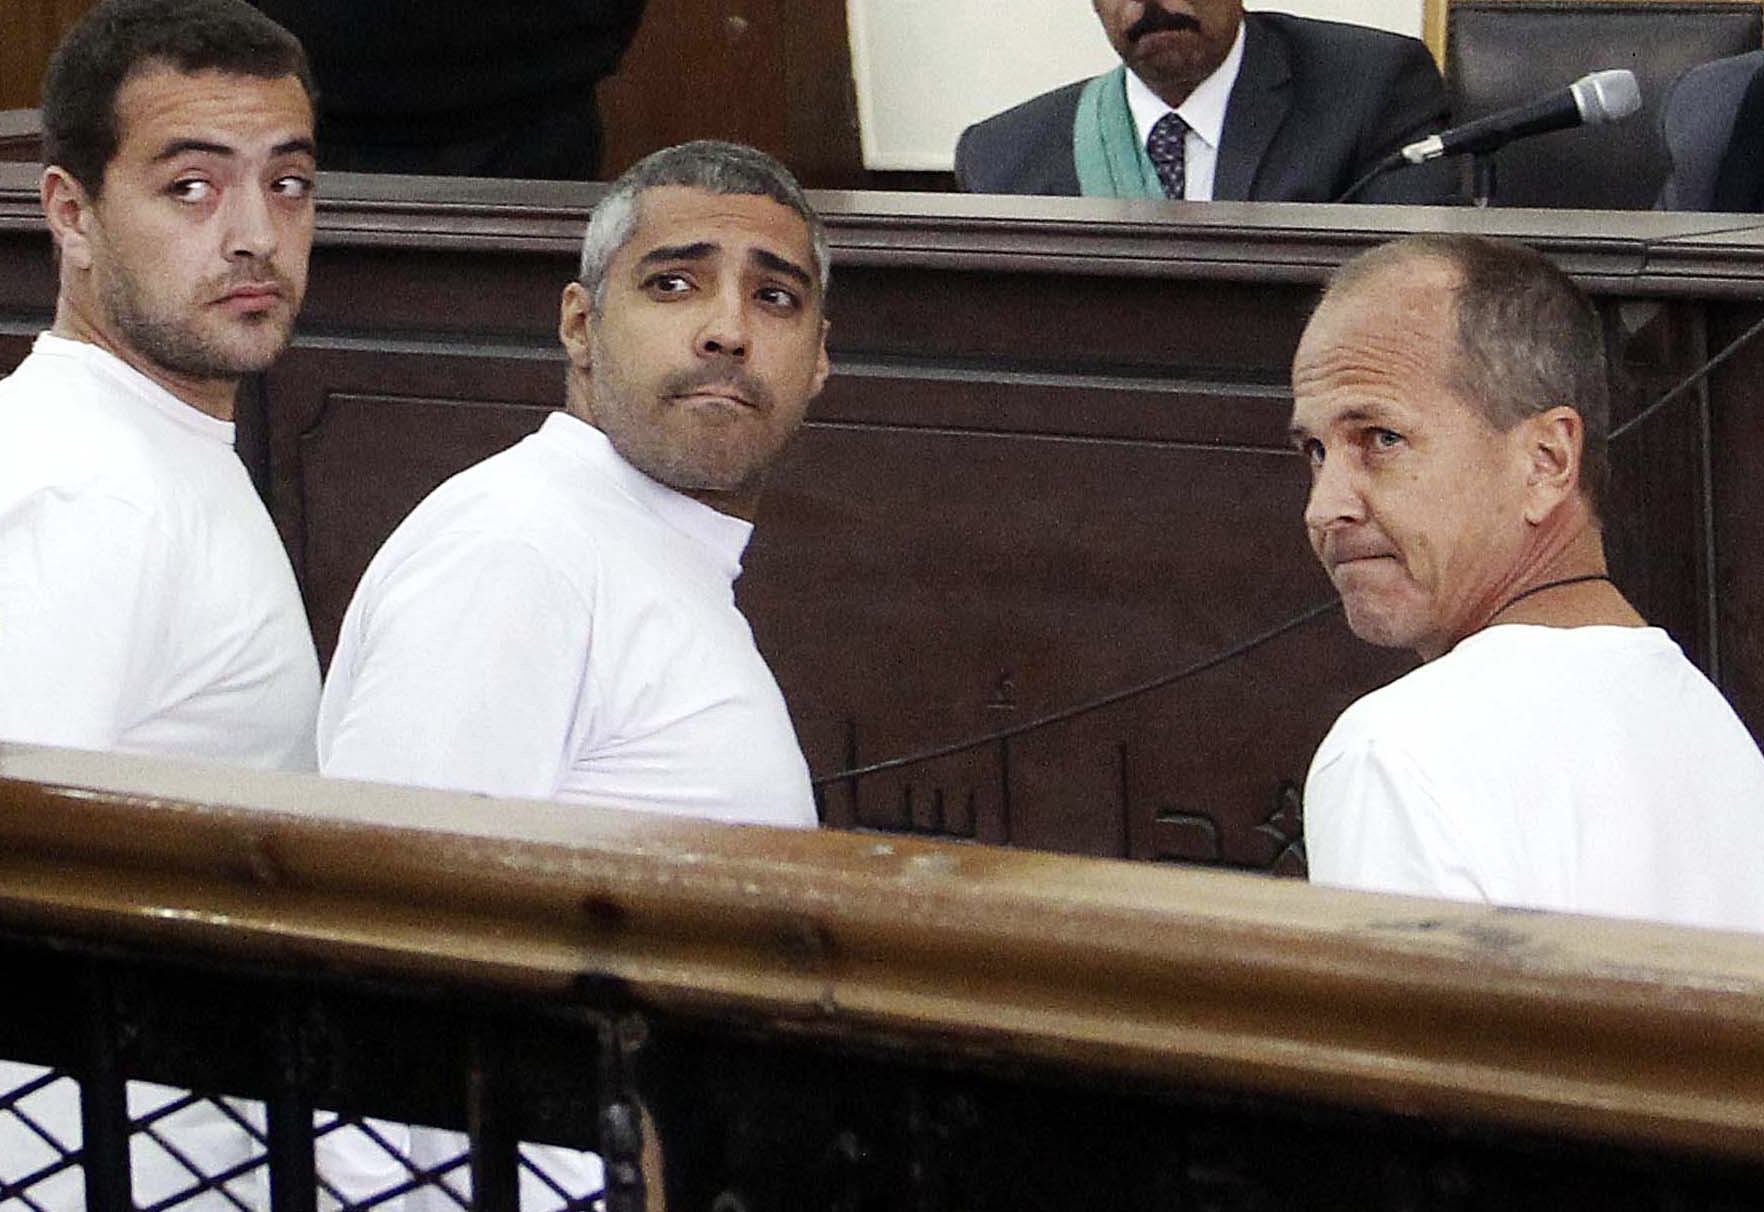 From left: al-Jazeera English producer Baher Mohamed, Canadian-Egyptian acting Cairo bureau chief Mohammed Fahmy and correspondent Peter Greste appear in court in Cairo on March 31, 2014 (Heba Elkholy—AP)